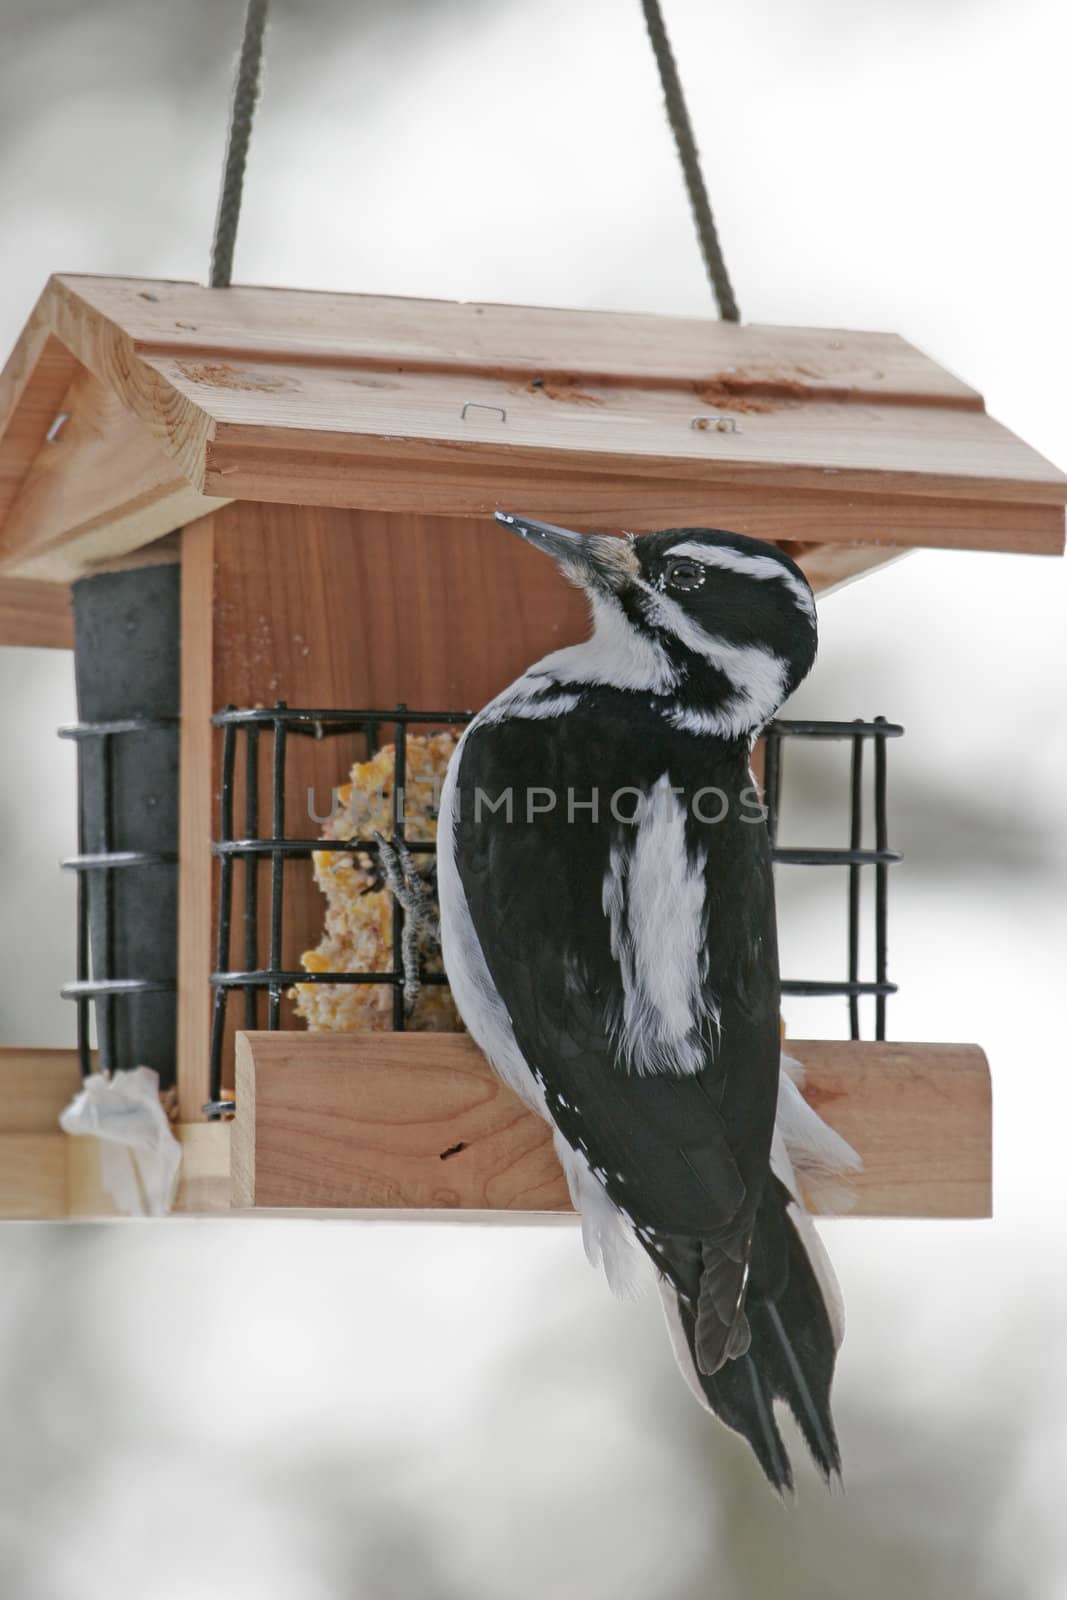 Downy Woodpecker female (Picoides pubescens) by donya_nedomam